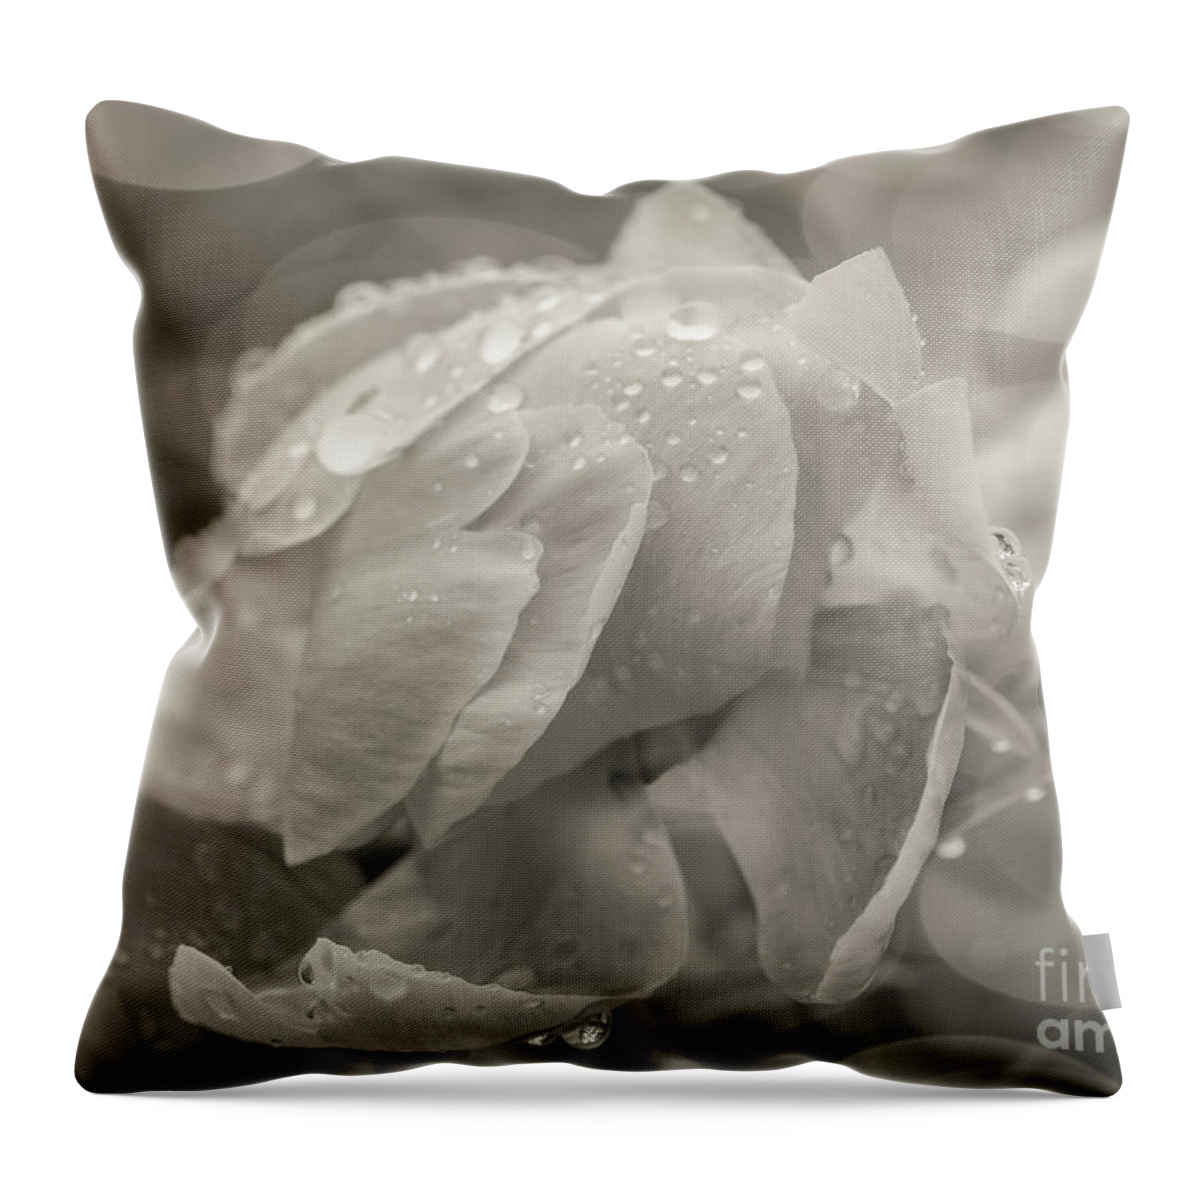 Wedding Day Bliss Throw Pillow featuring the photograph Wedding Day Bliss by Rachel Cohen